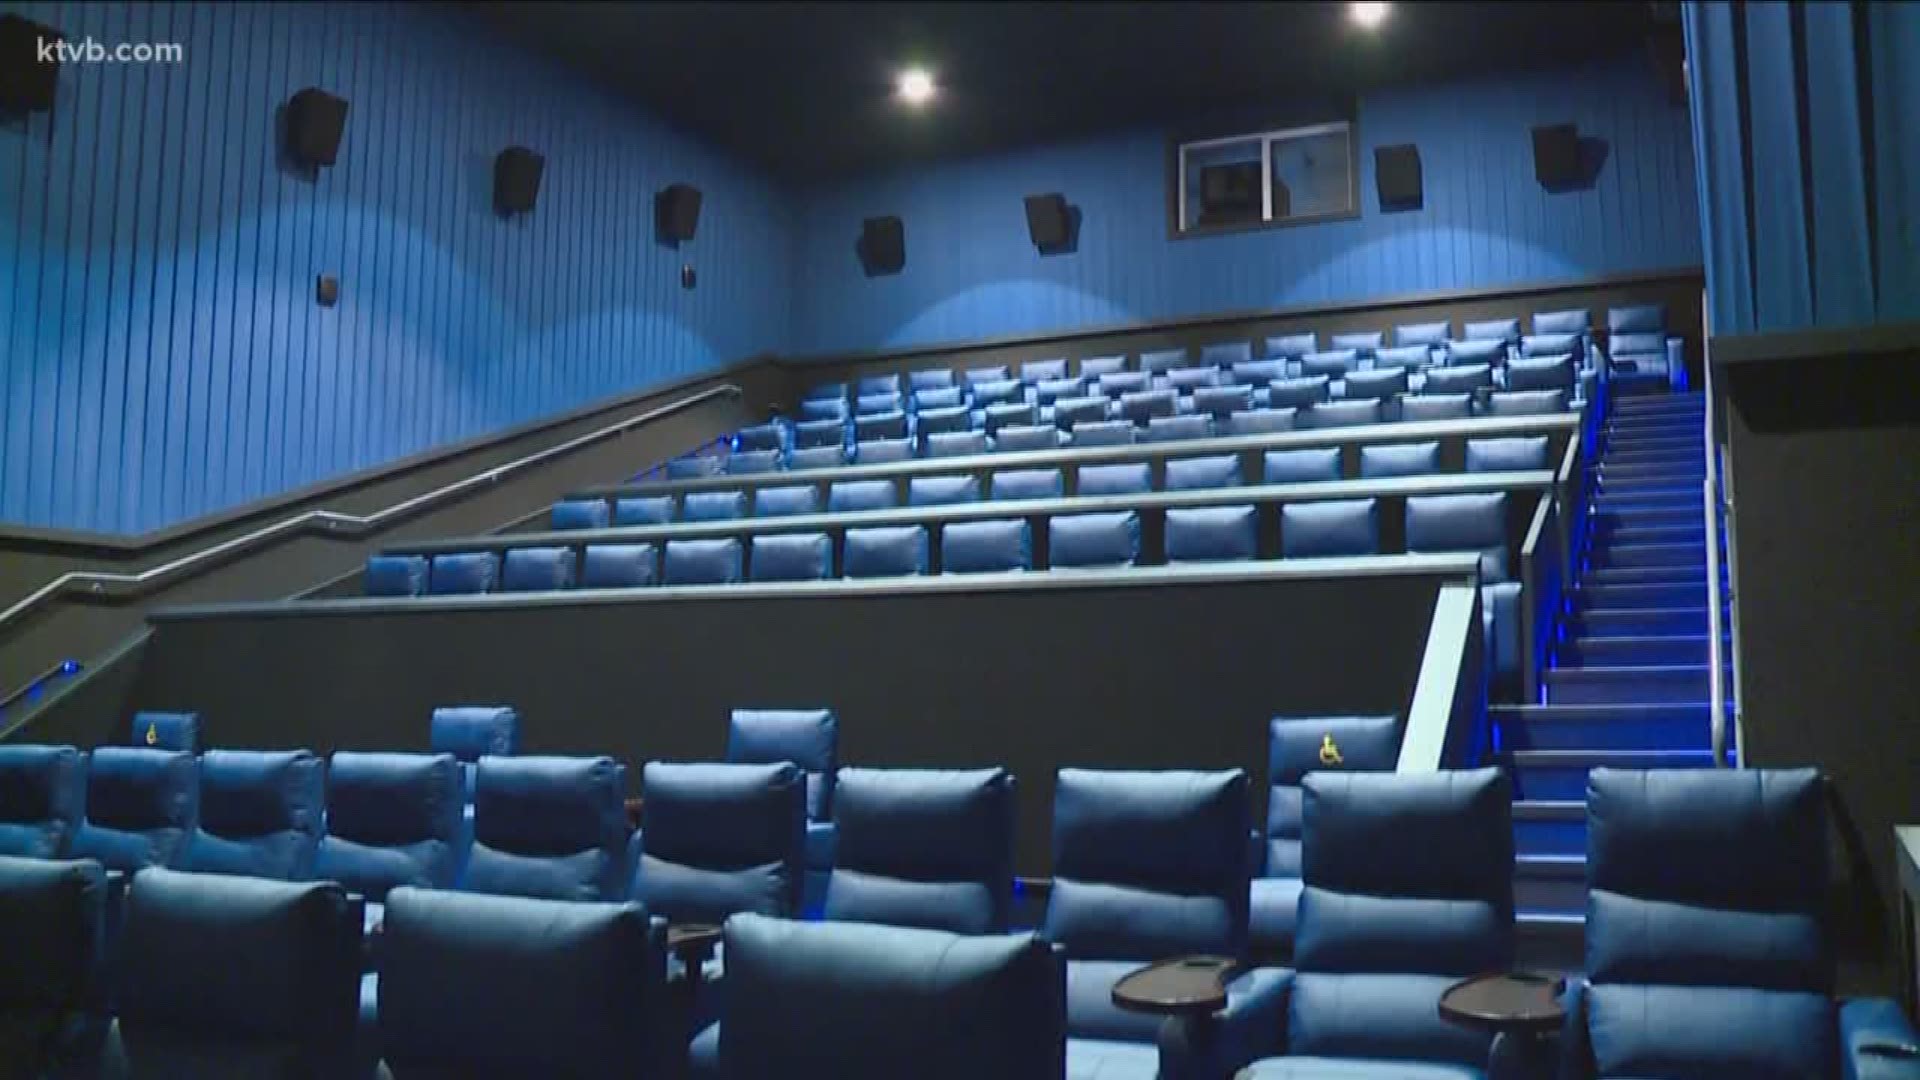 New movie theater opens in downtown Caldwell | ktvb.com